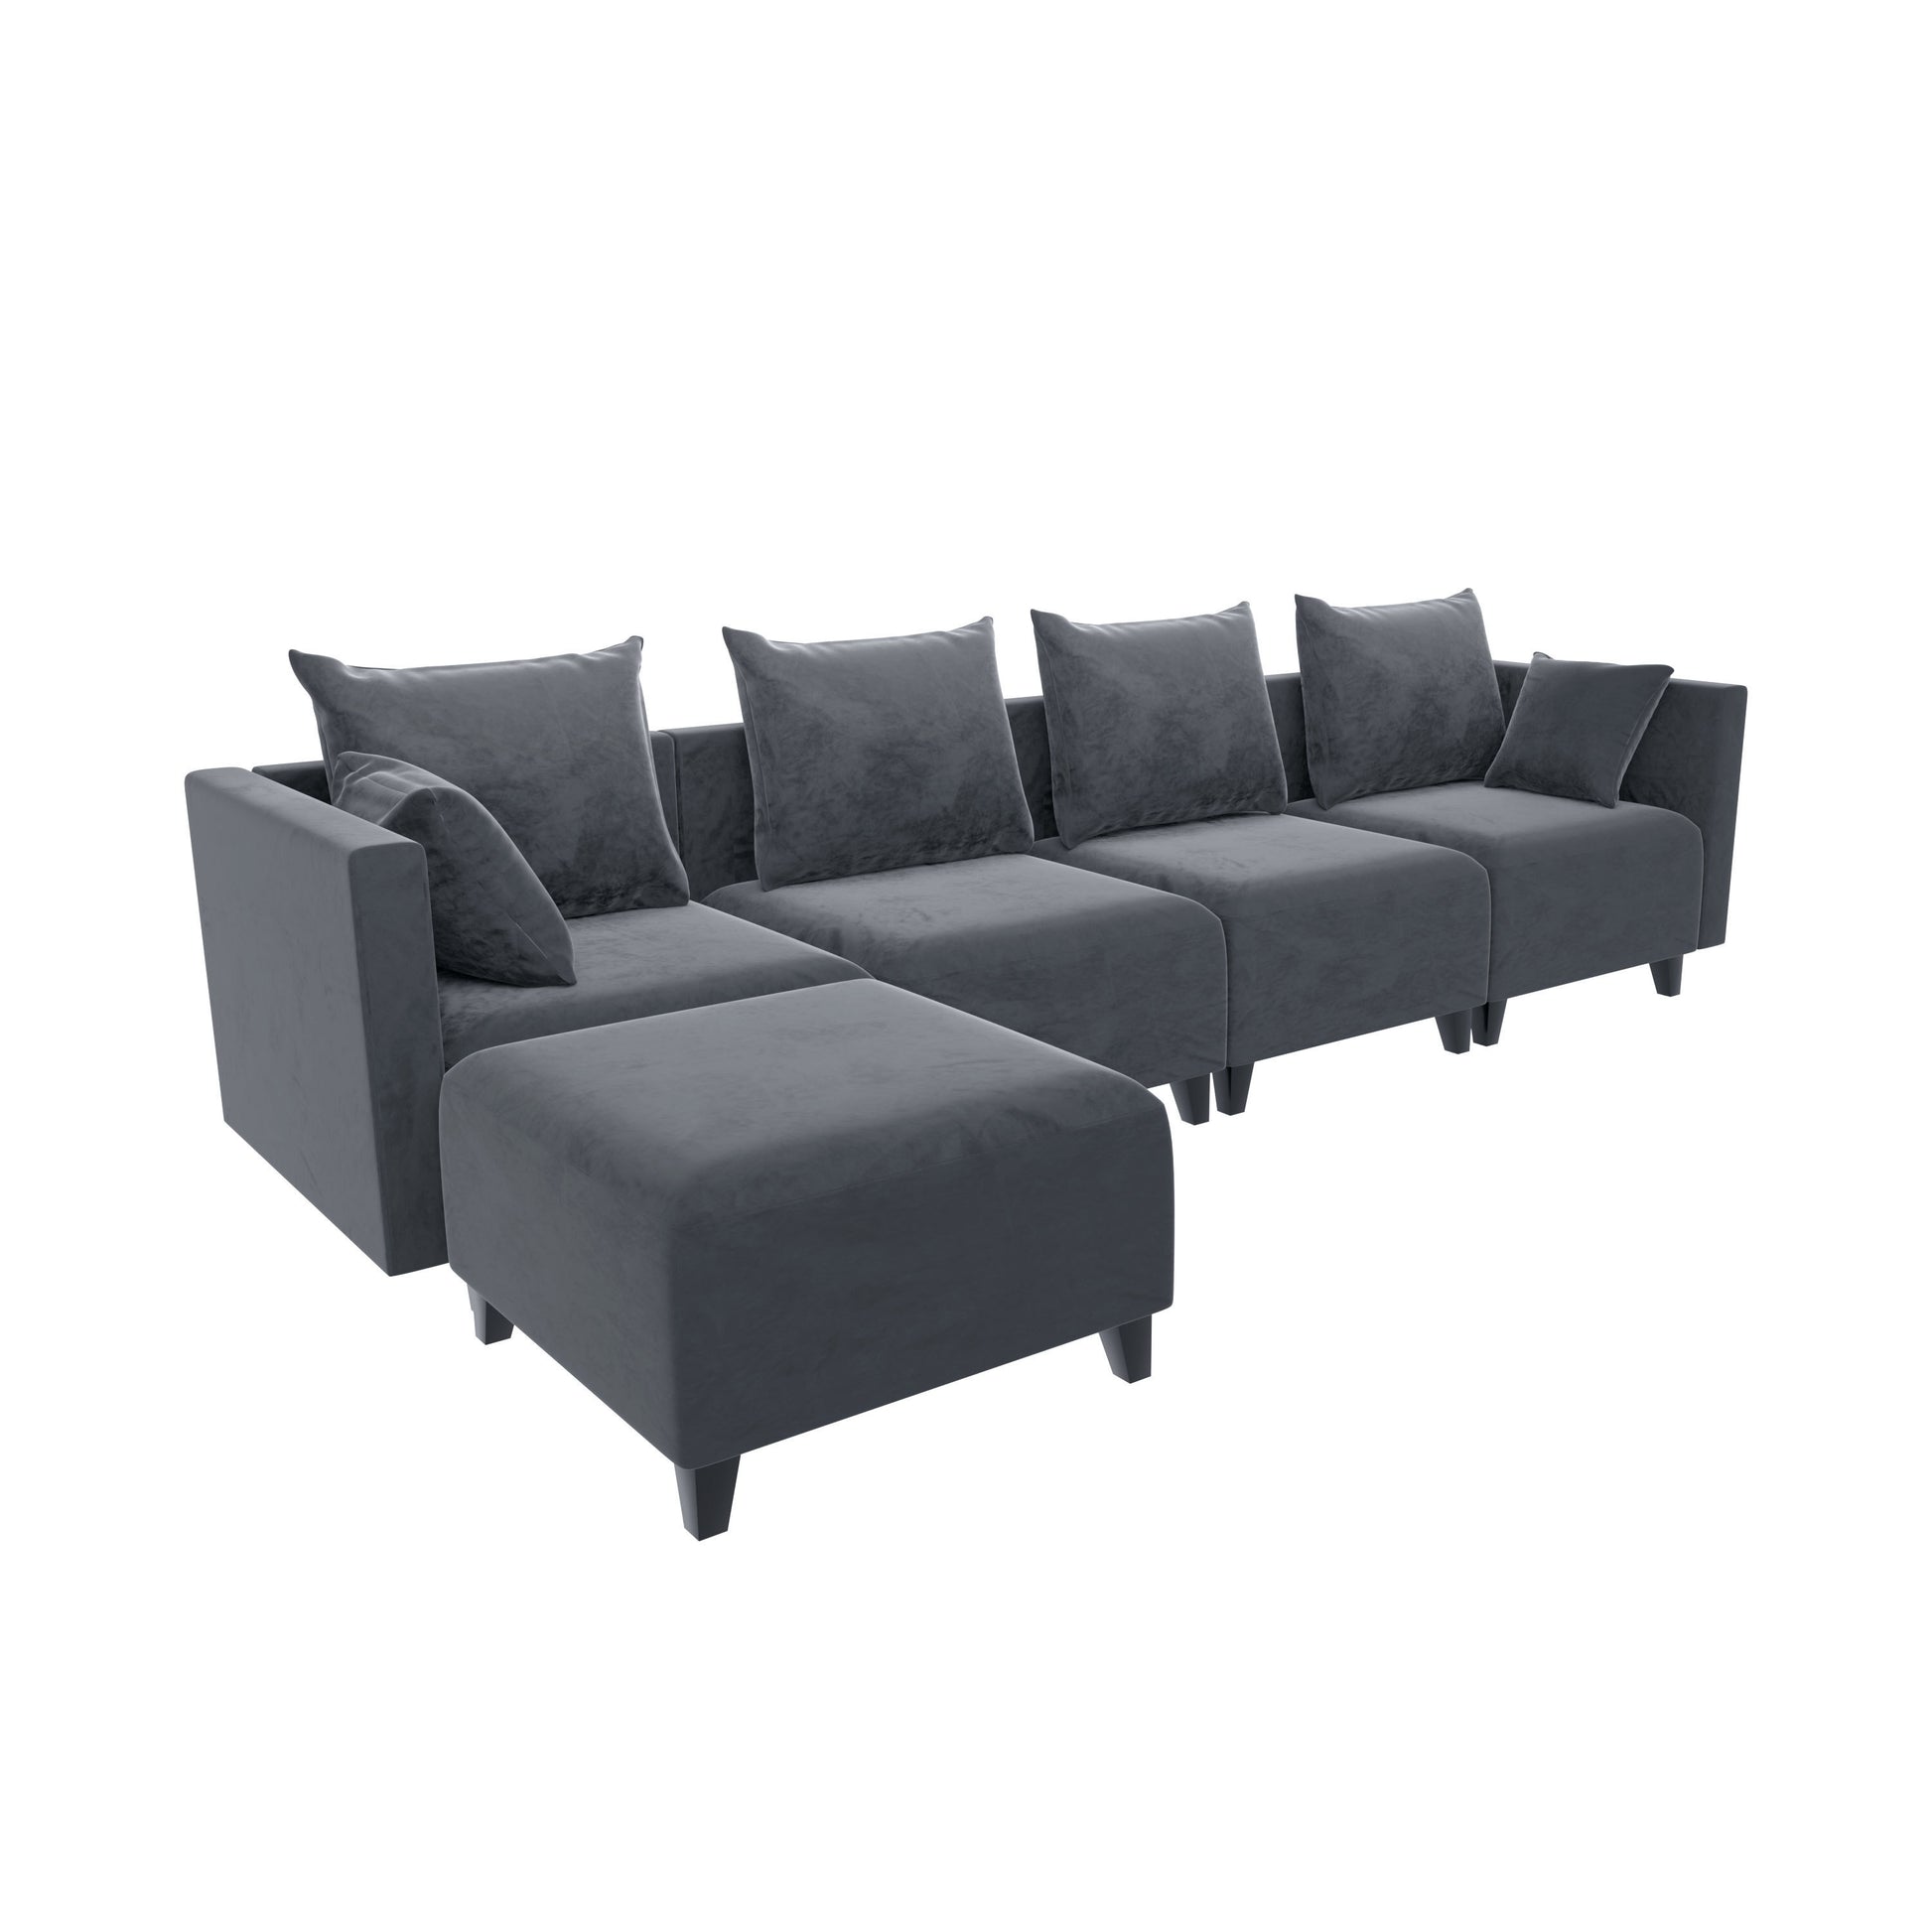 Small L Shape Modular Sectional Sofa with 6 Pillows for Living Room